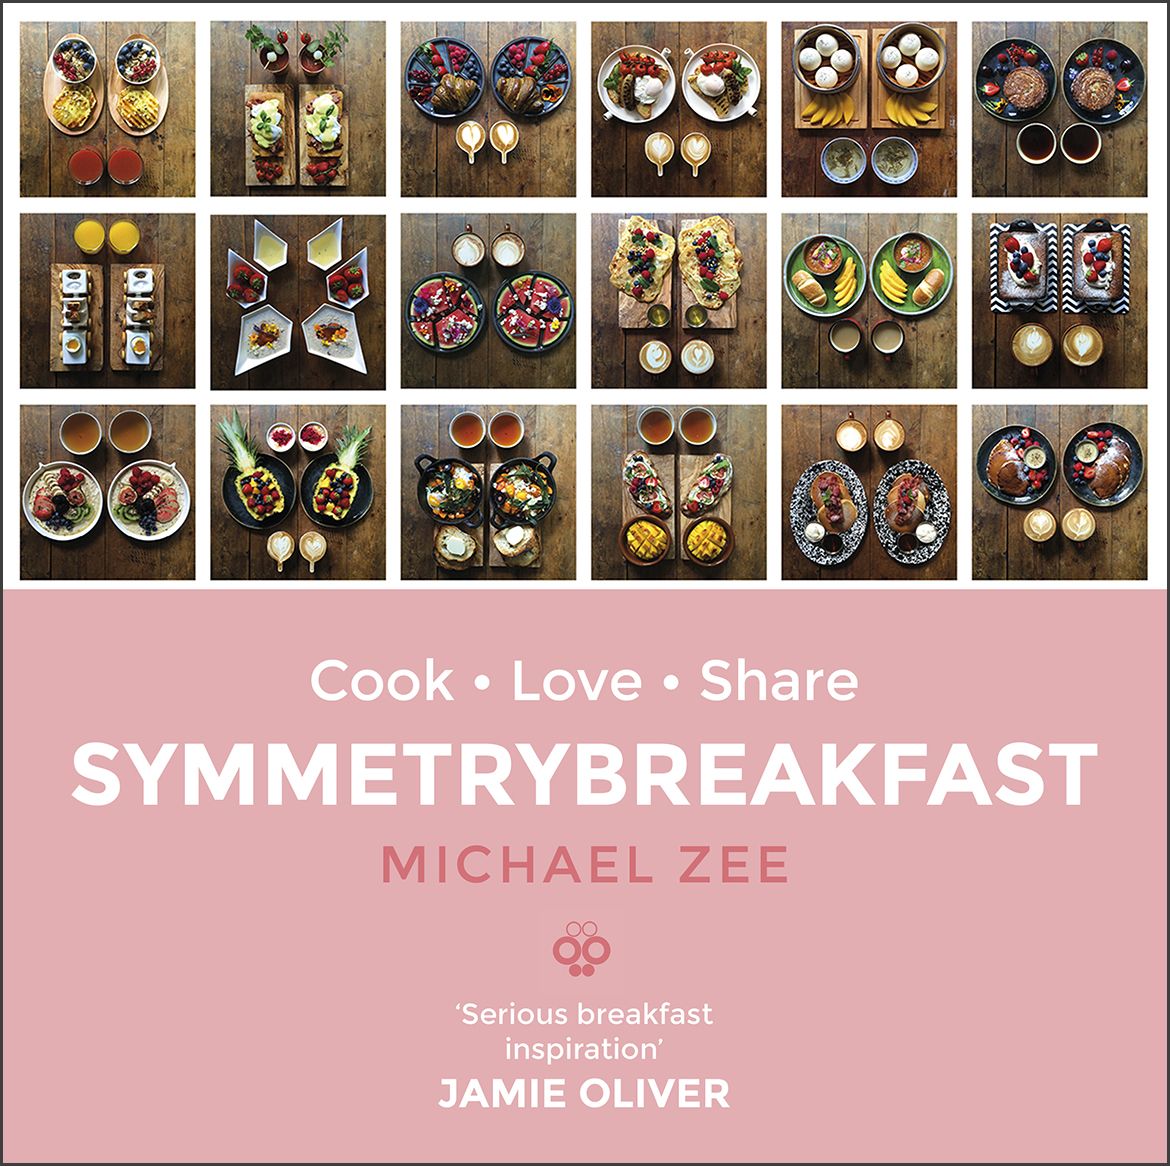 SymmetryBreakfast became a cooking book published worldwide in four languages 